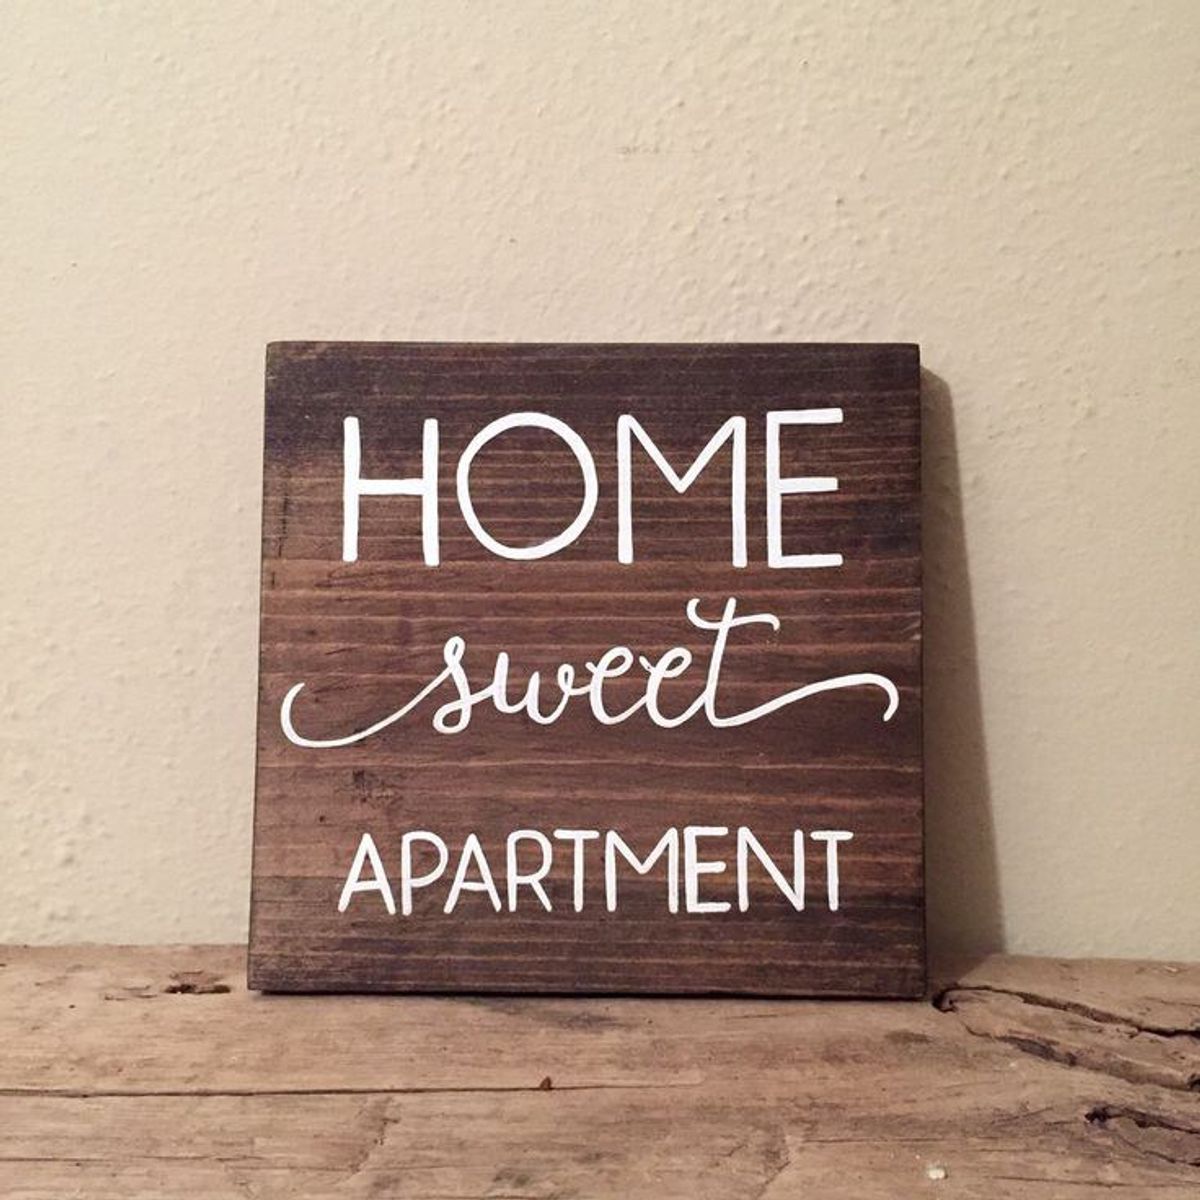 10 Things I'm Excited To Have An Apartment For